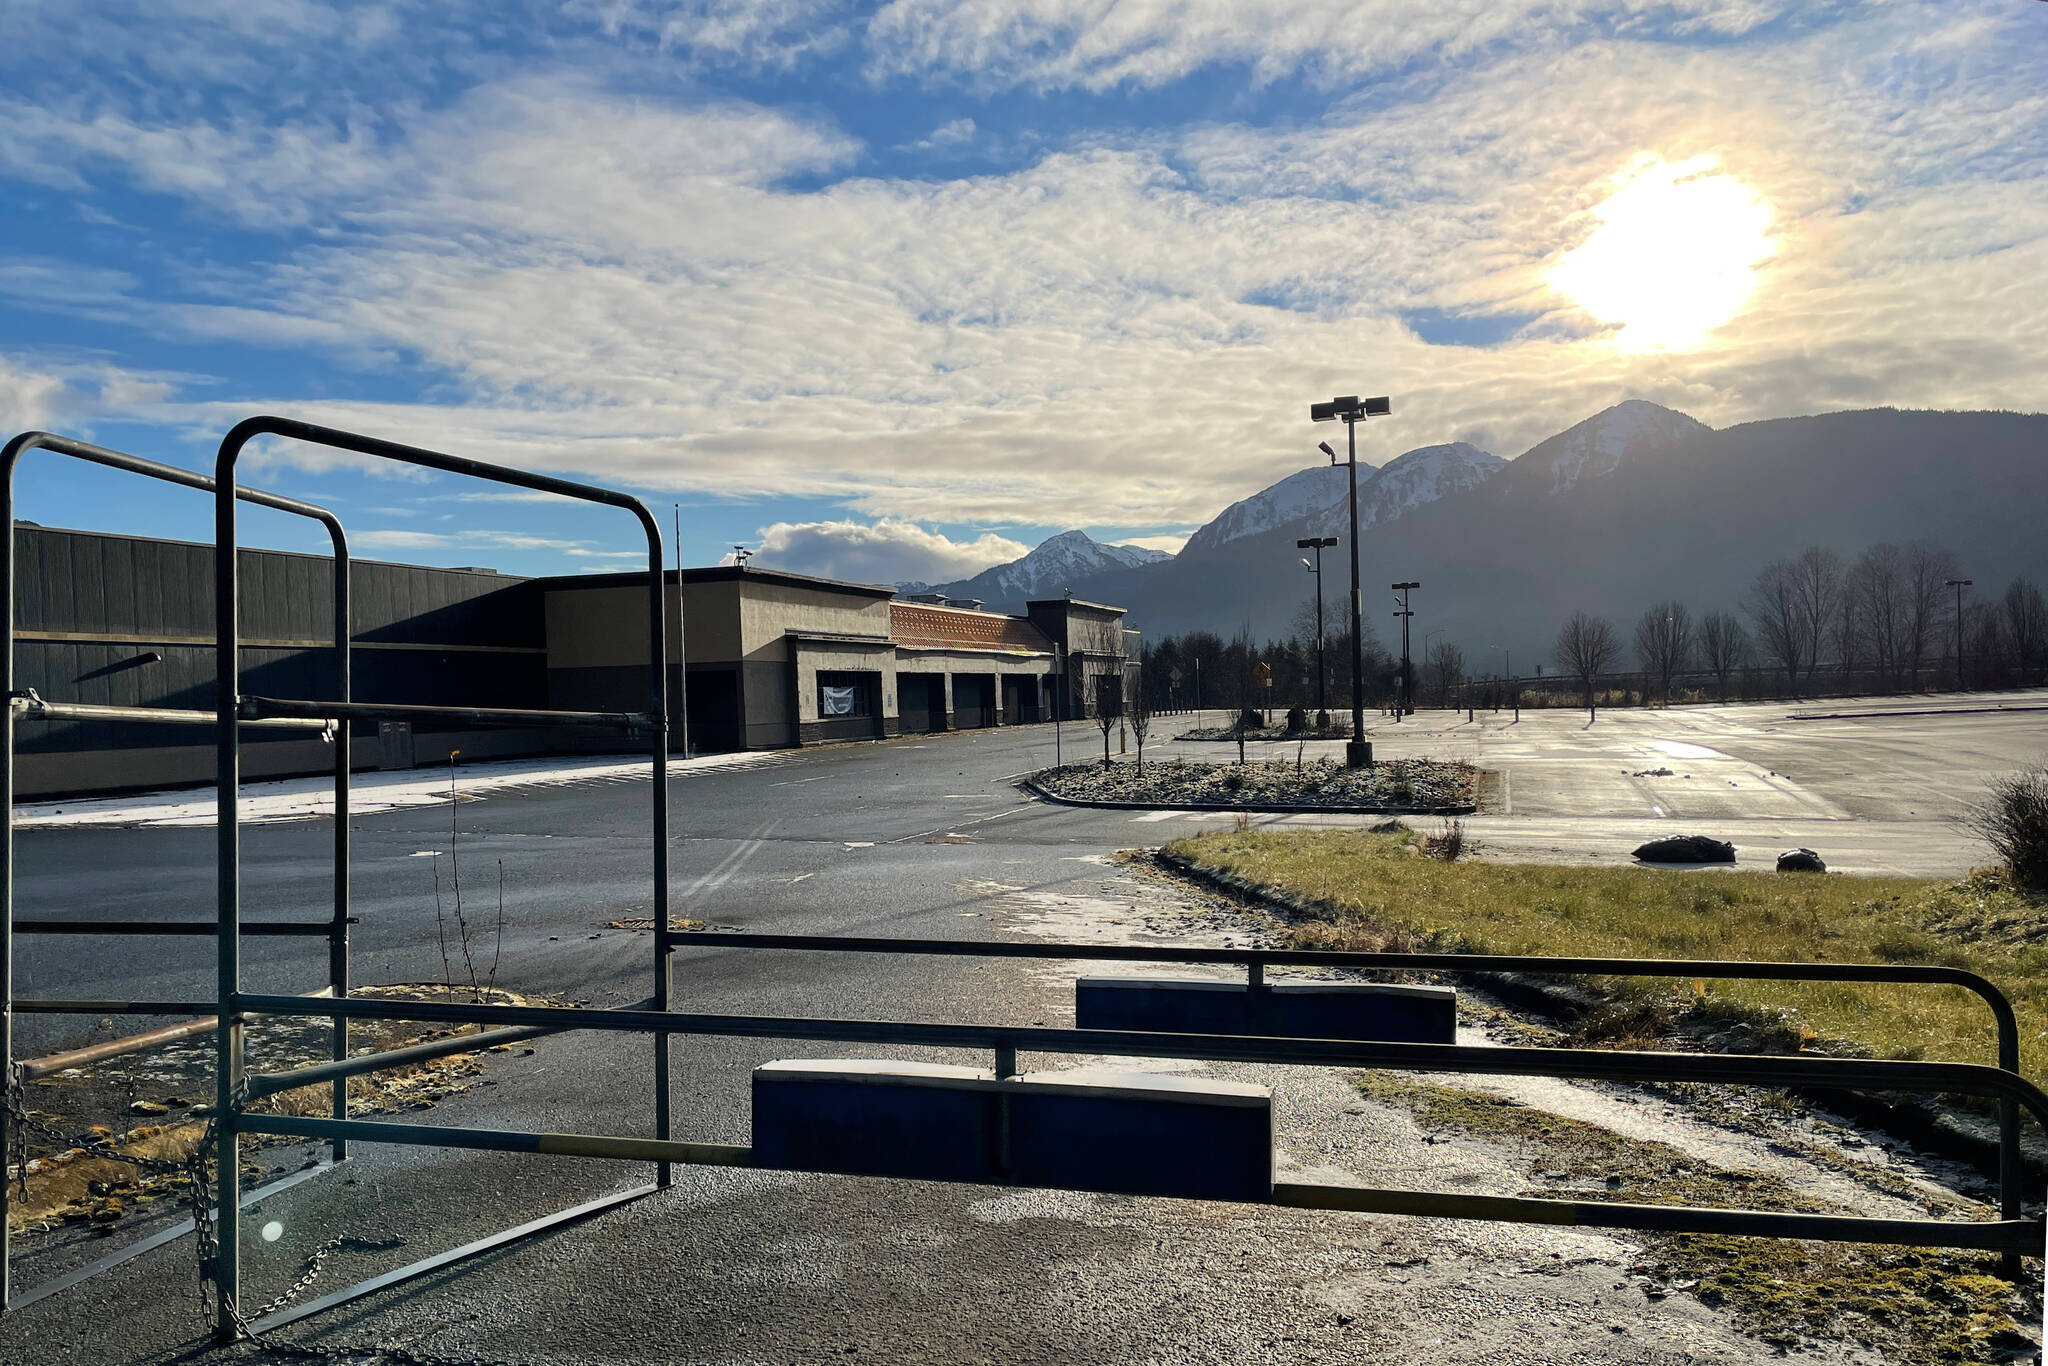 The former Walmart is one possible option for the location of a new city hall for Juneau, according to a recent survey. (Michael S. Lockett / Juneau Empire)